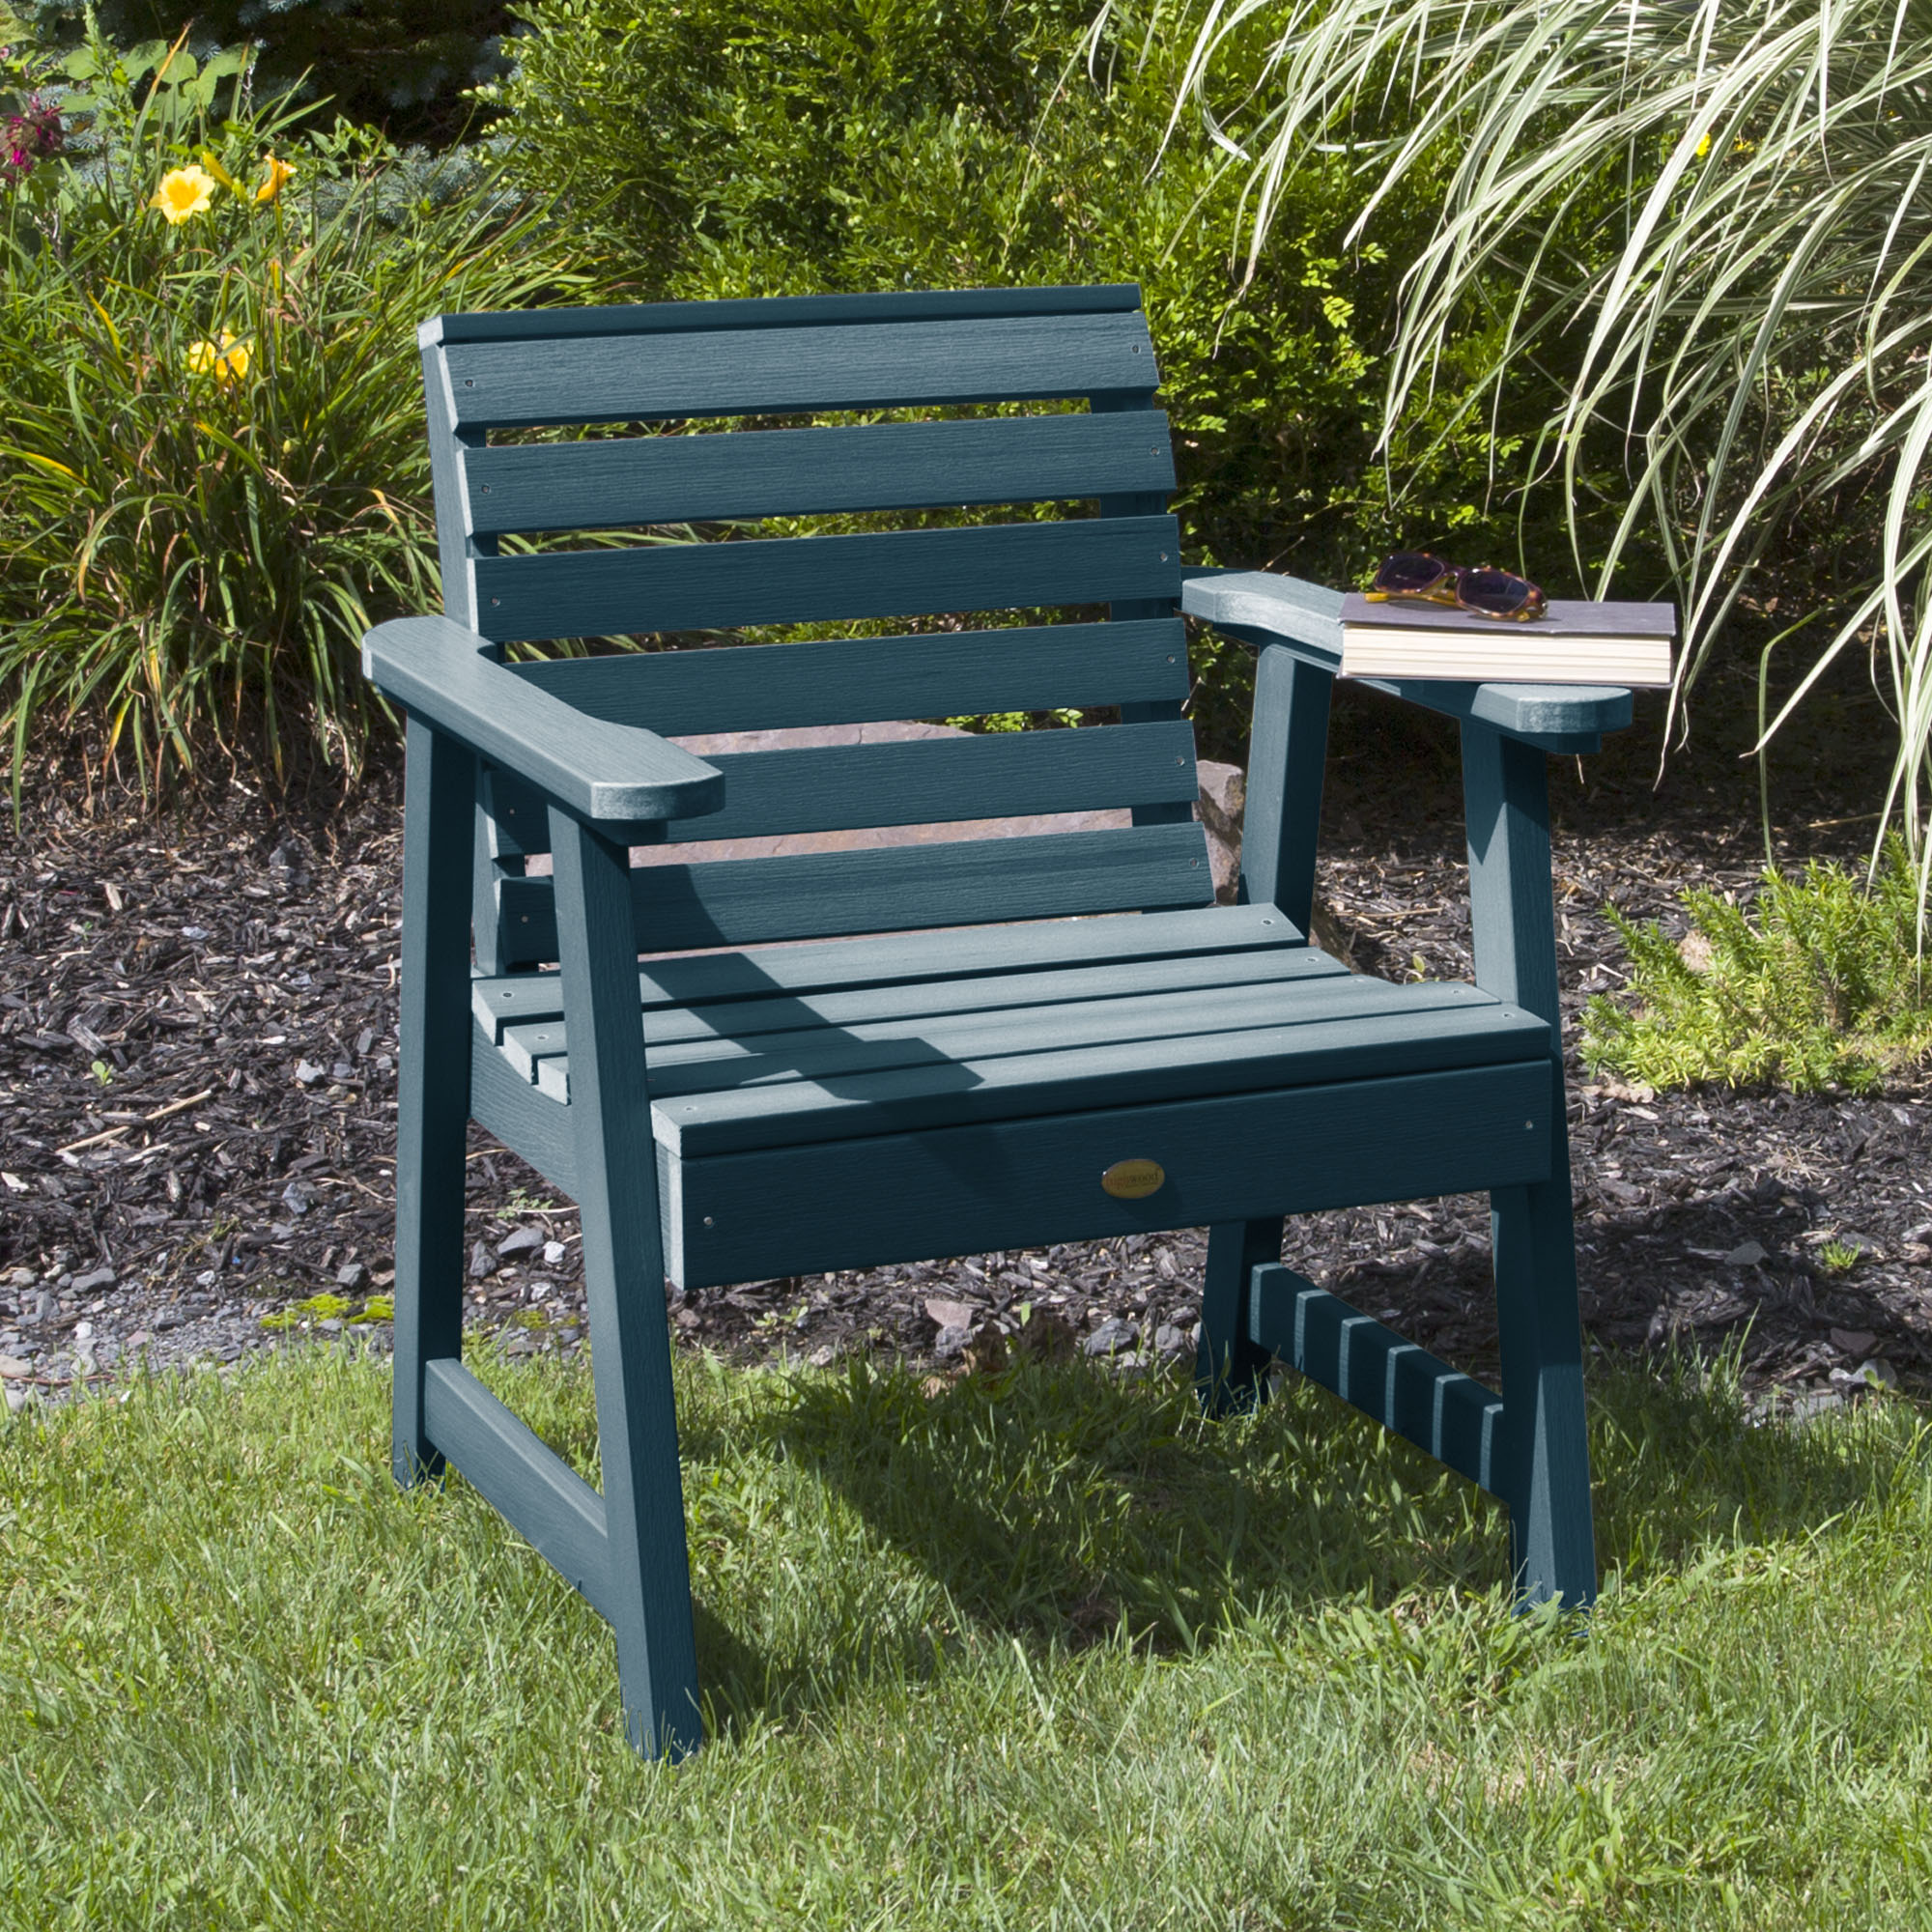 Highwood 3pc Weatherly Garden Chair Set with 1 Adirondack Square Side Table - image 4 of 6